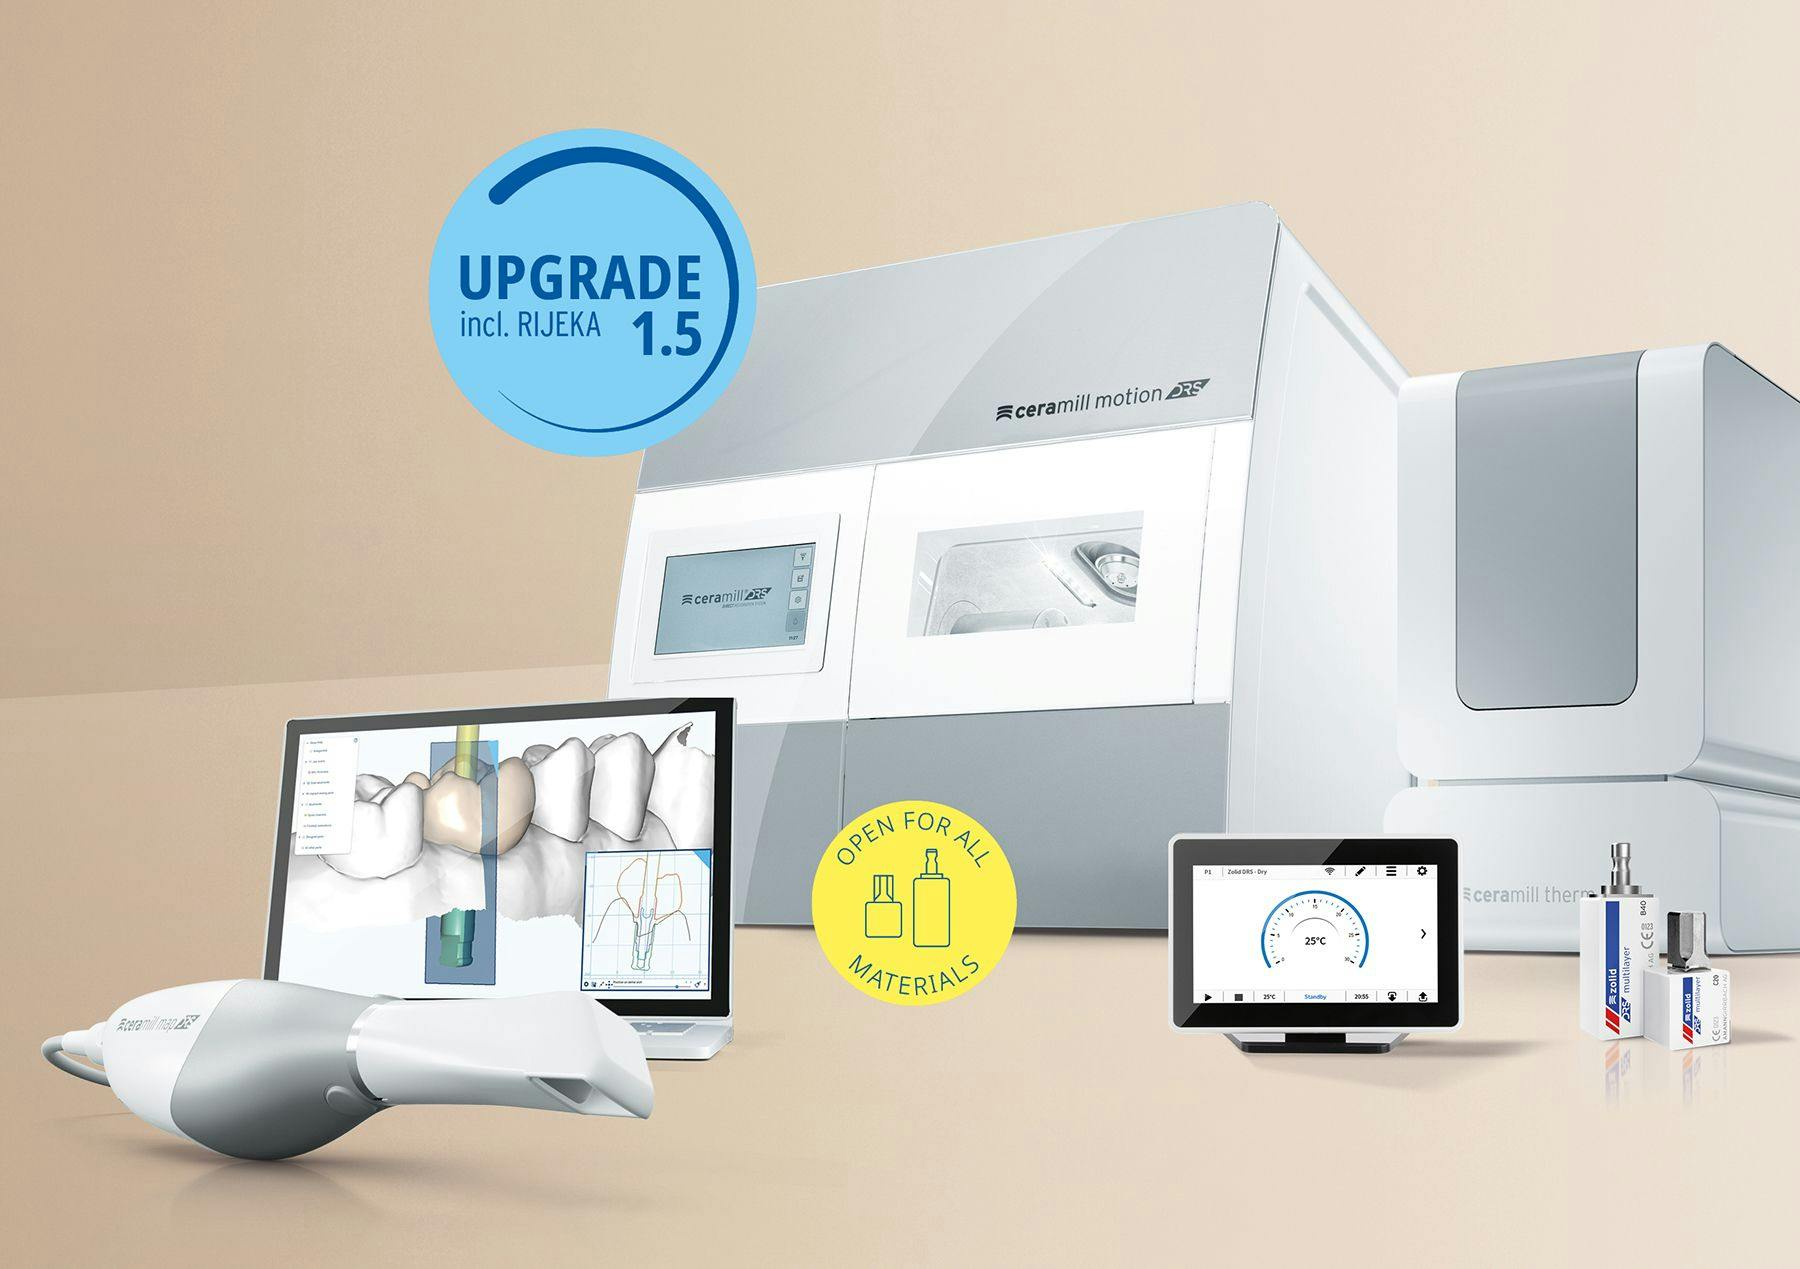 Amann Girrbach Expands Chairside Indictions and Materials with the Launch of Ceramill DRS Software Upgrade 1.5  | Image Credit: © Amann Girrbach